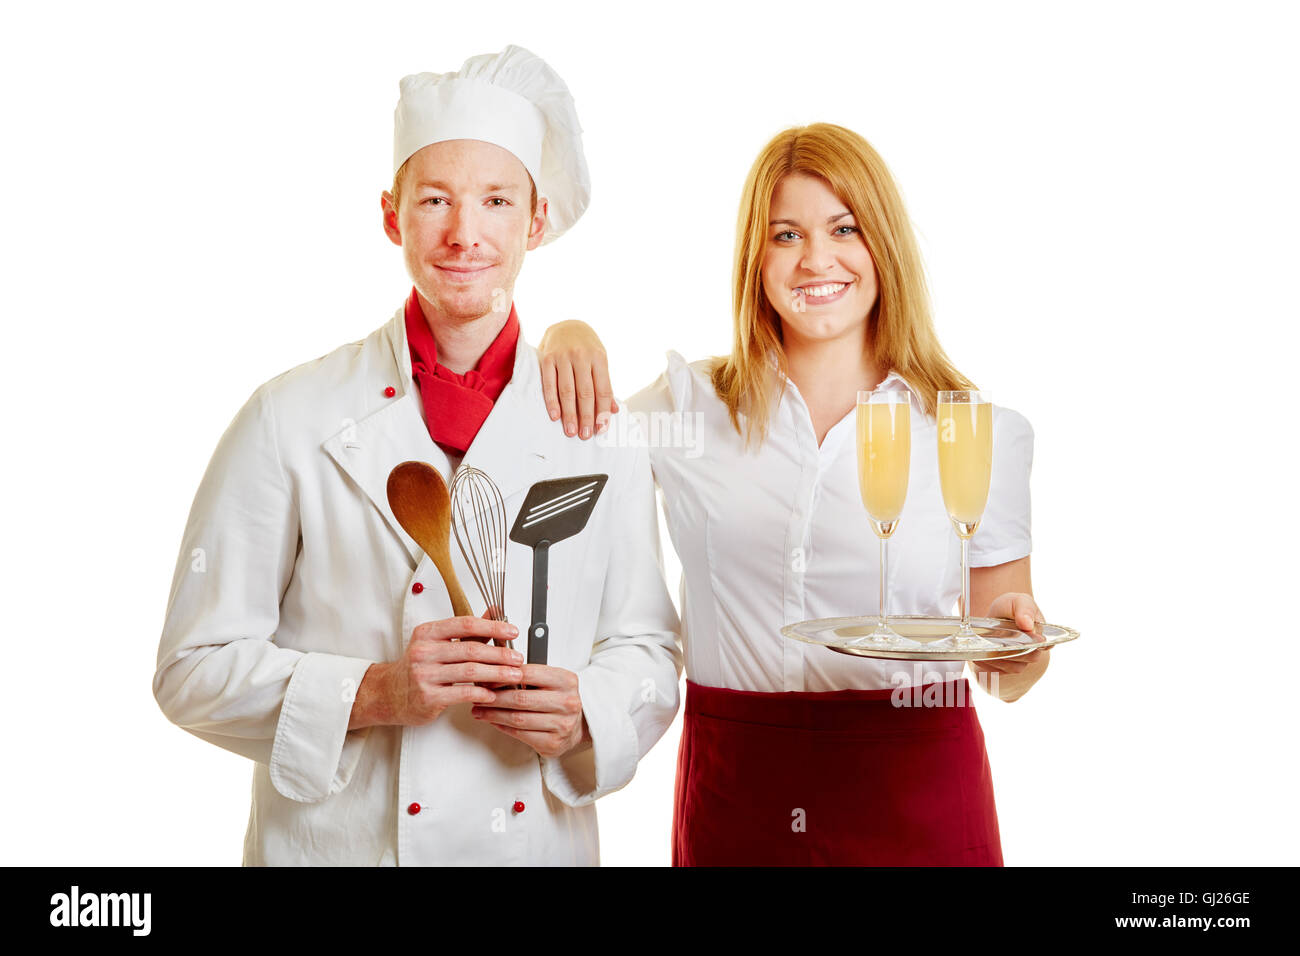 Waitress and chef as service personnel of a restaurant Stock Photo